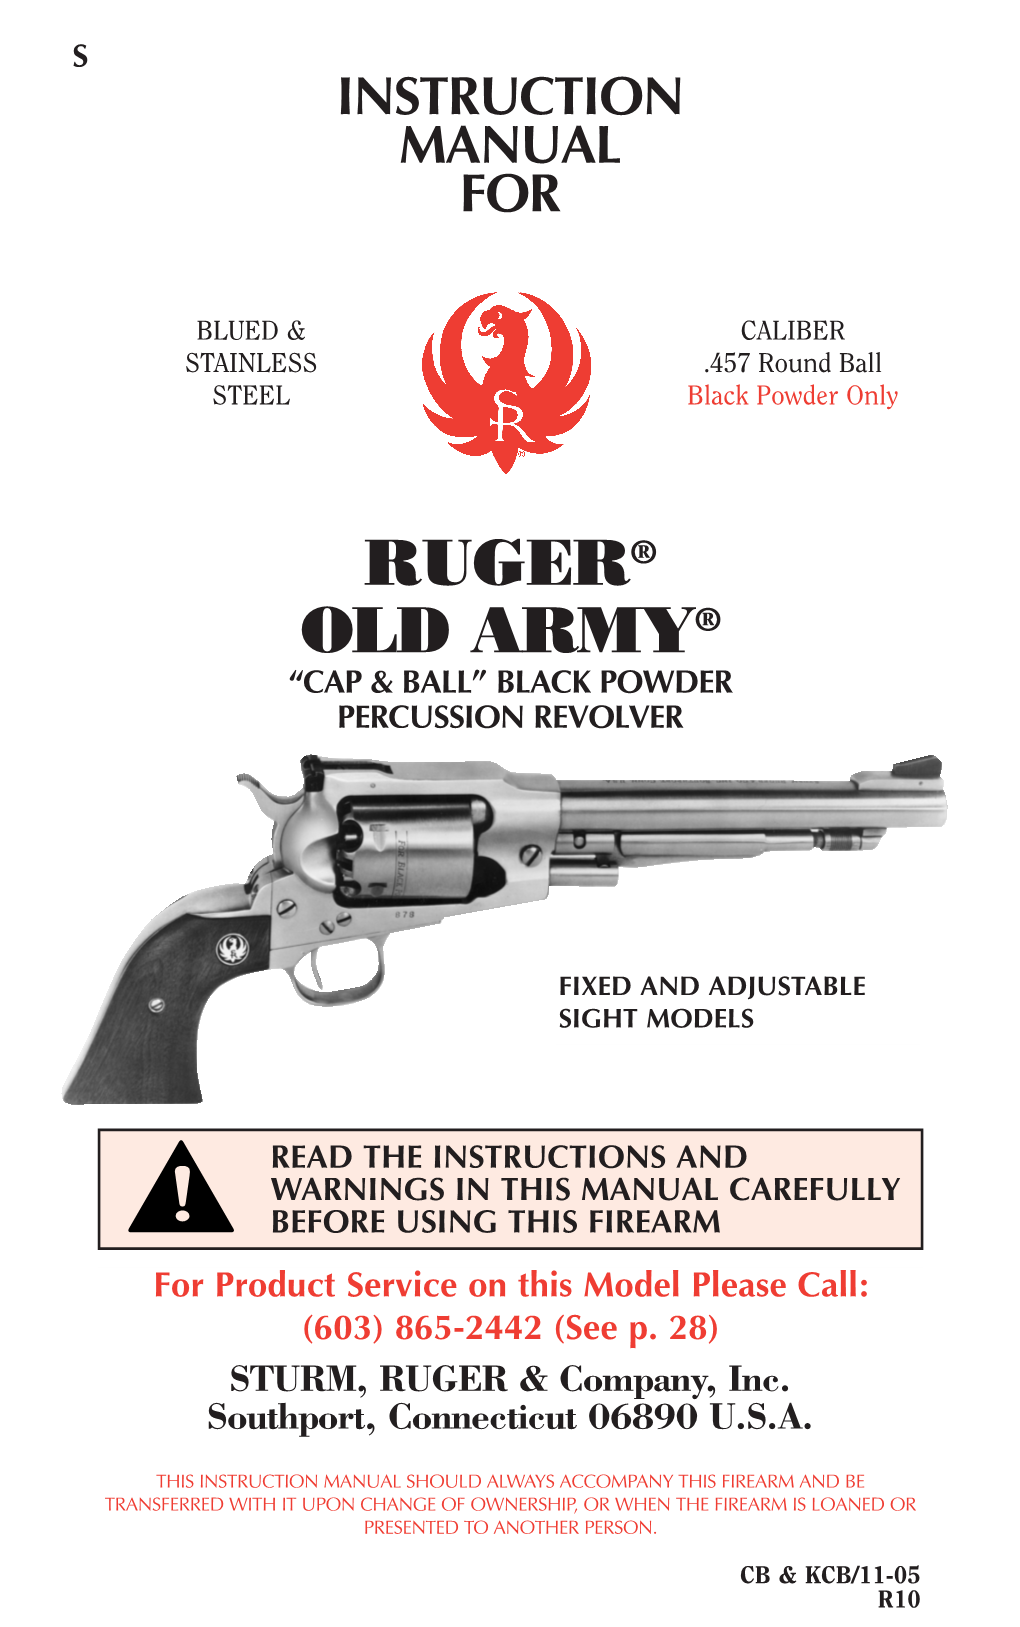 Ruger 'Old Army' Instruction Manual